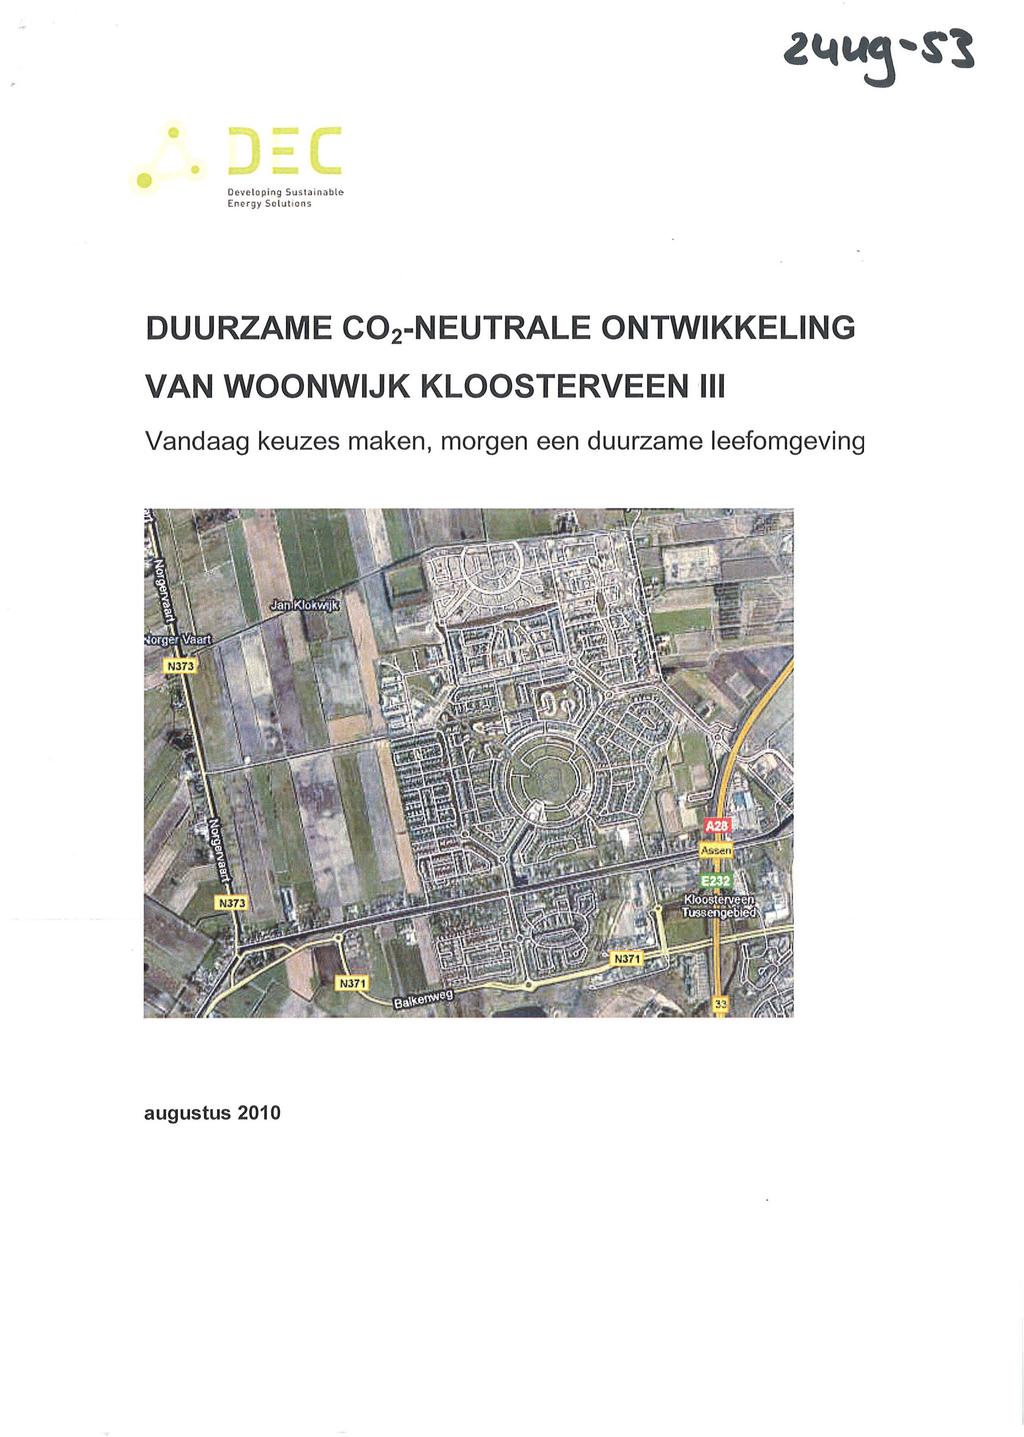 ... Deve l op i ng Su s1ain able Energy So lutions DUURZAME CO 2 -NEUTRALE ONTWIKKELING VAN